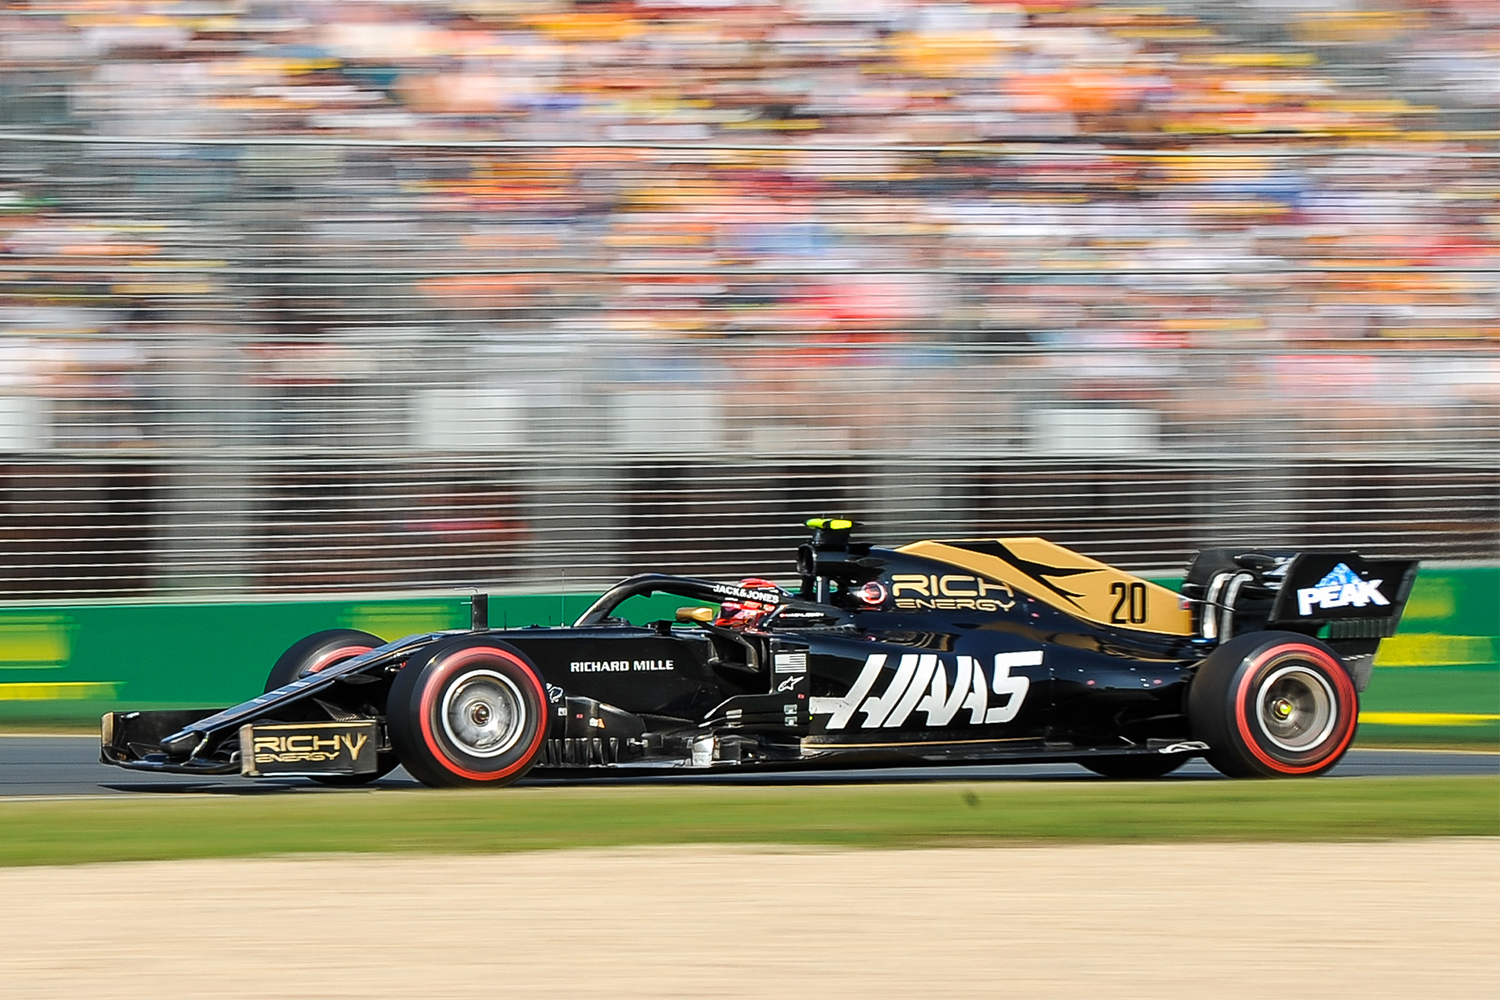 Magnussen drives for Rich Energy Haas F1 Team in the Australian Grand Prix in March 2019.